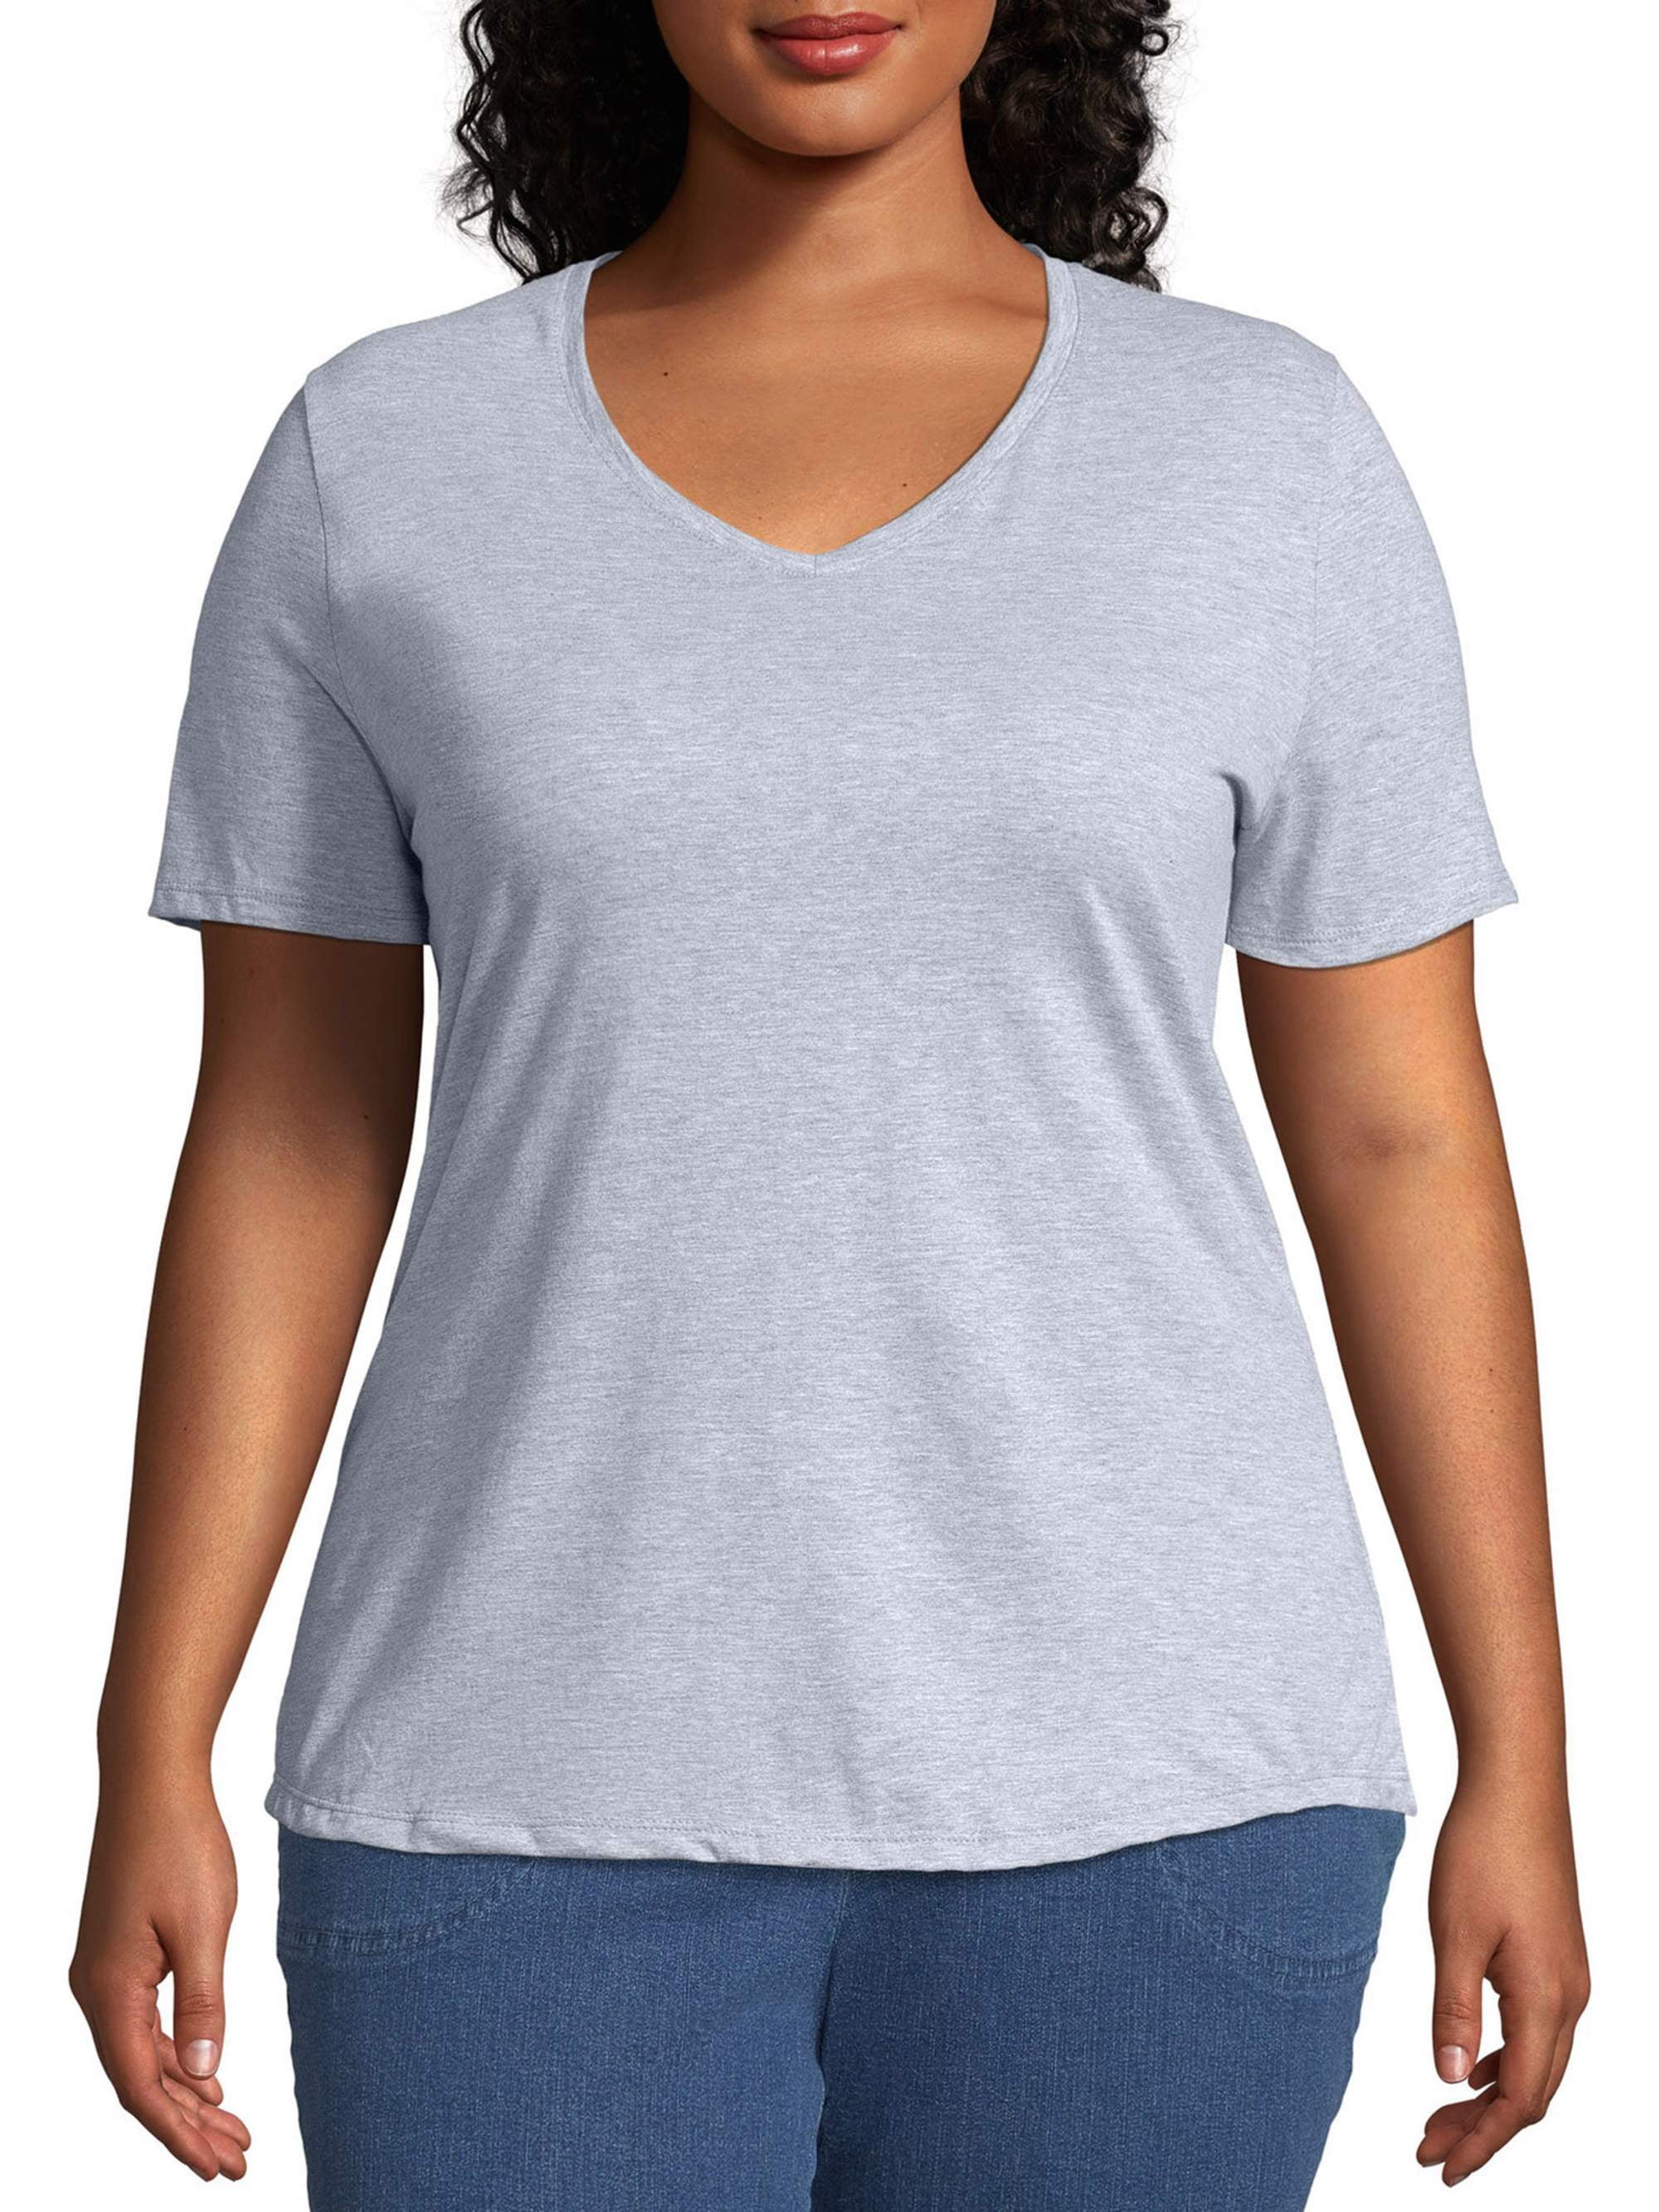 Just My Size Womens Plus-Size Short-Sleeve V-Neck T-Shirt